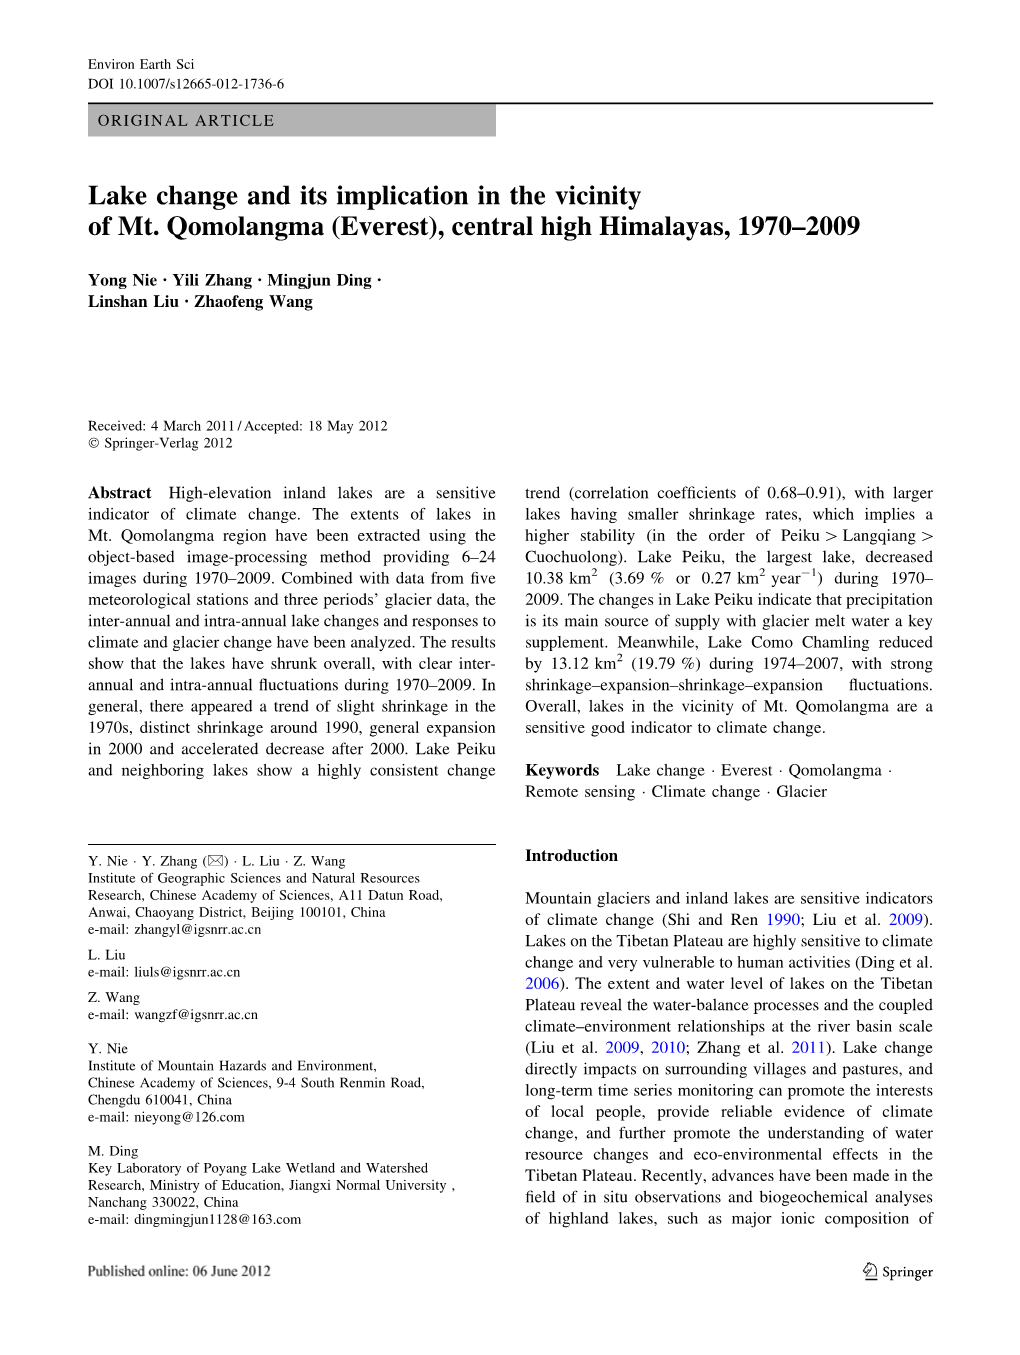 Lake Change and Its Implication in the Vicinity of Mt. Qomolangma (Everest), Central High Himalayas, 1970–2009